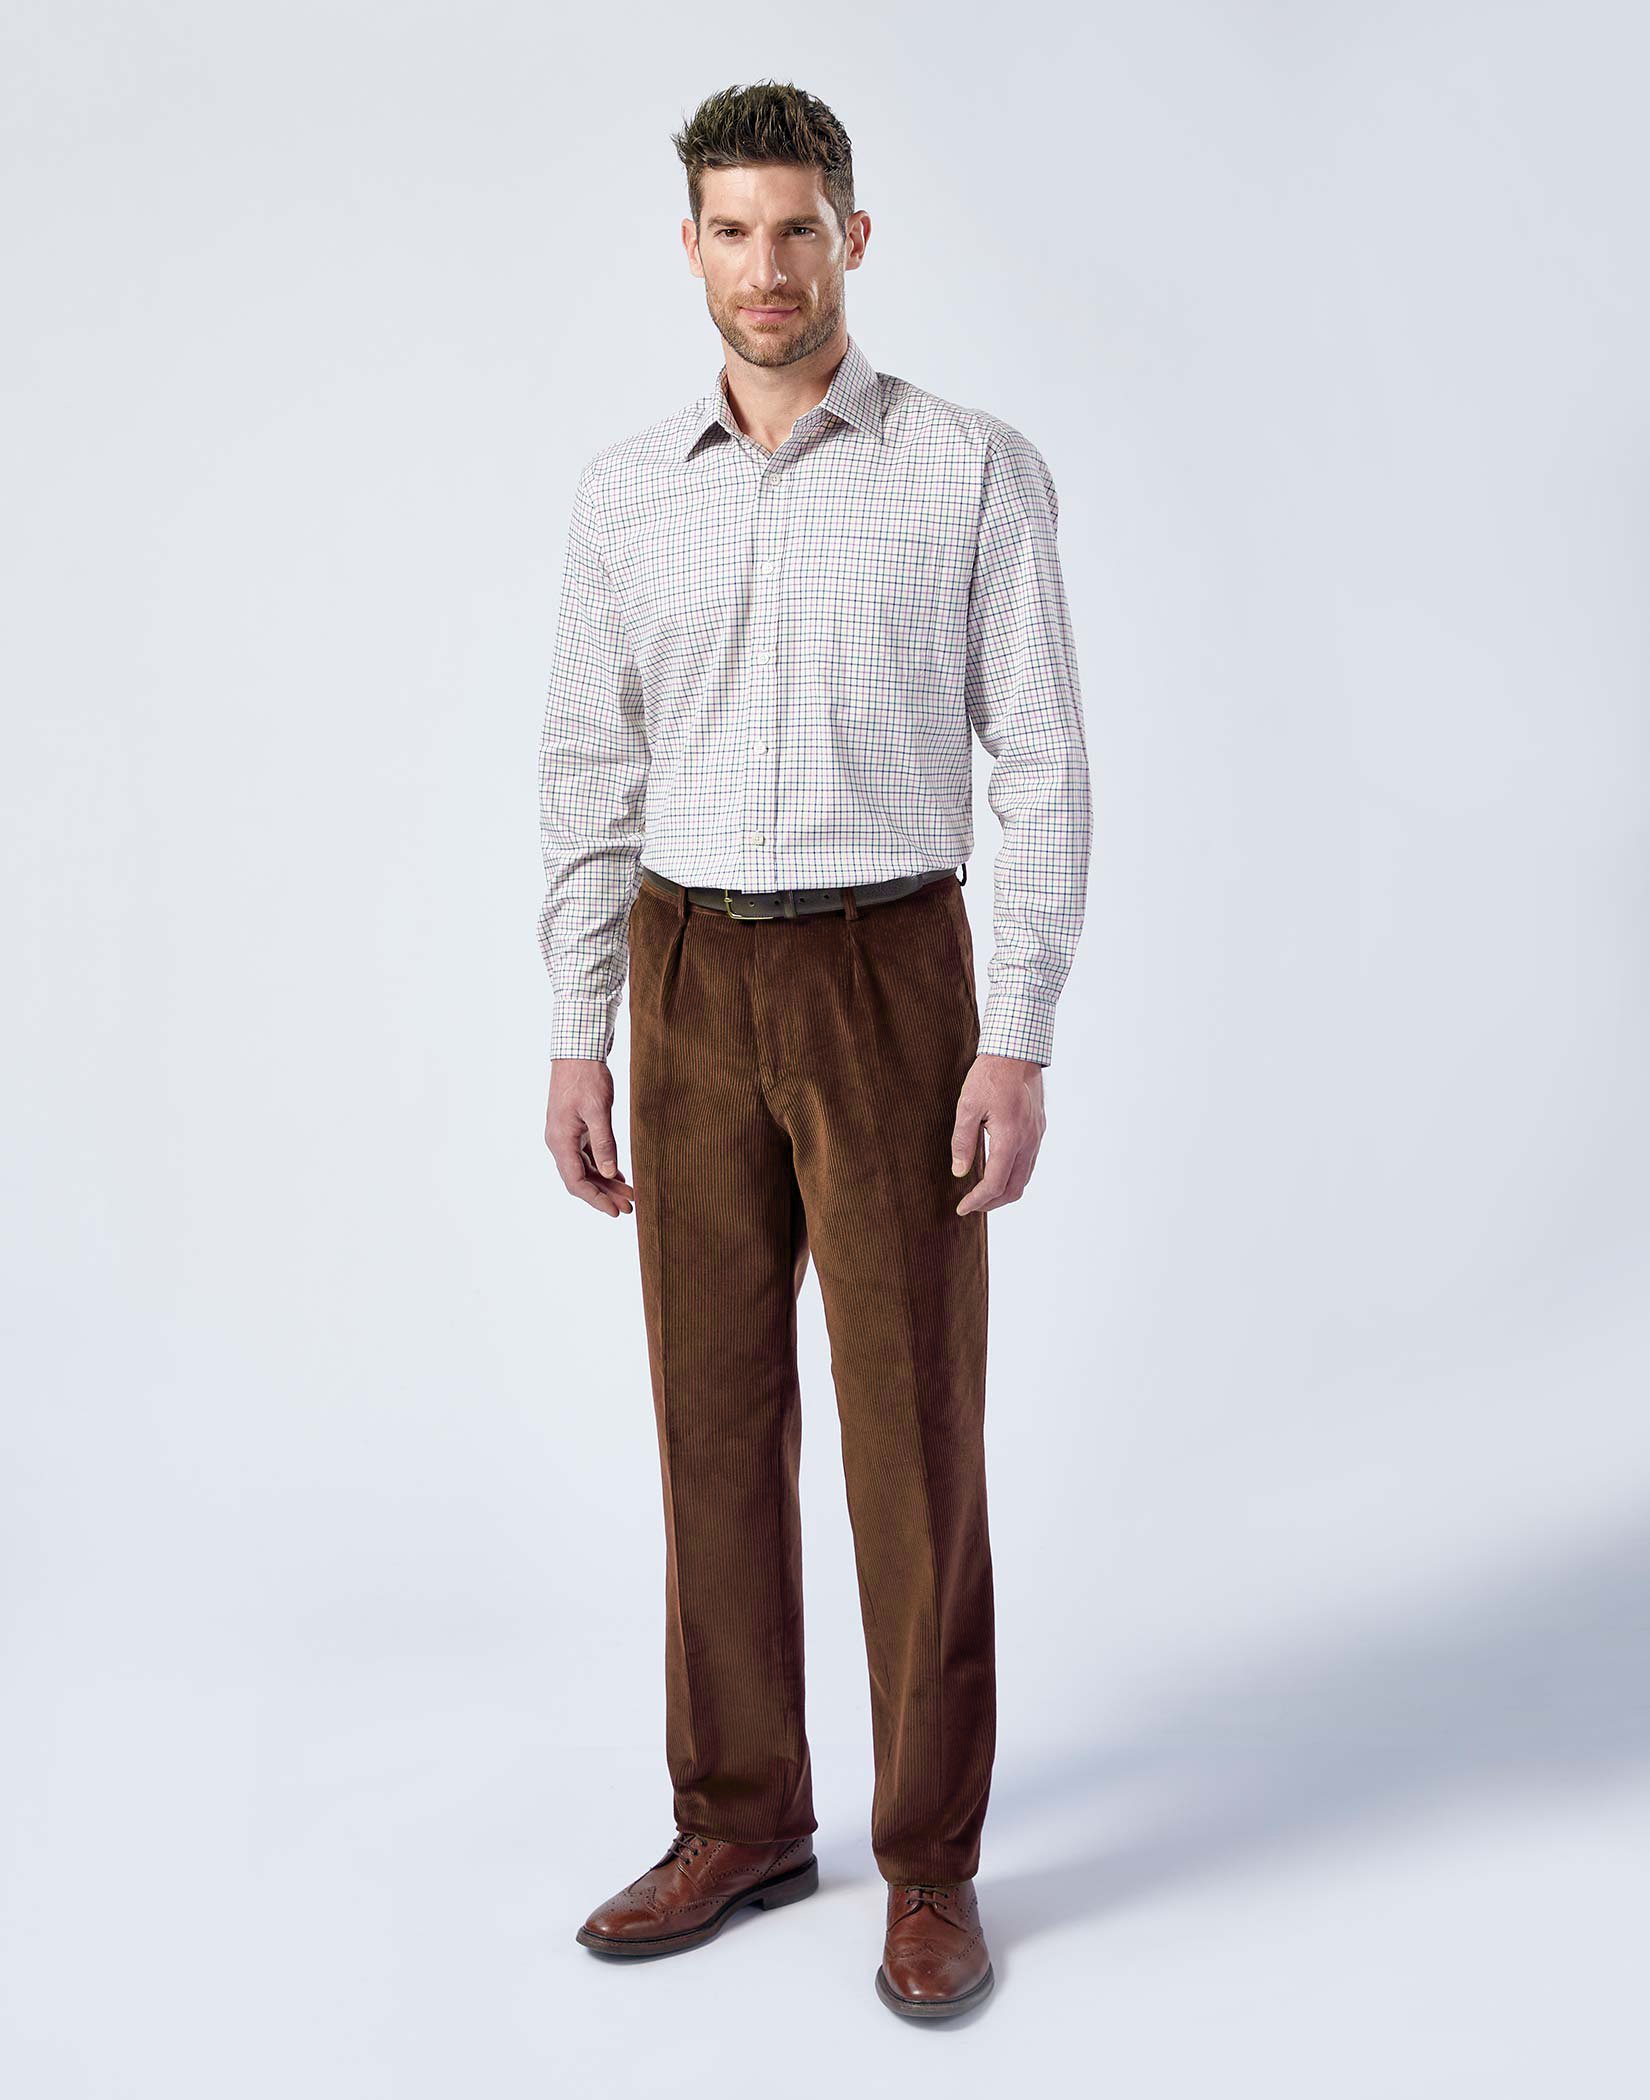 Mens Corduroy Trousers for sale  eBay